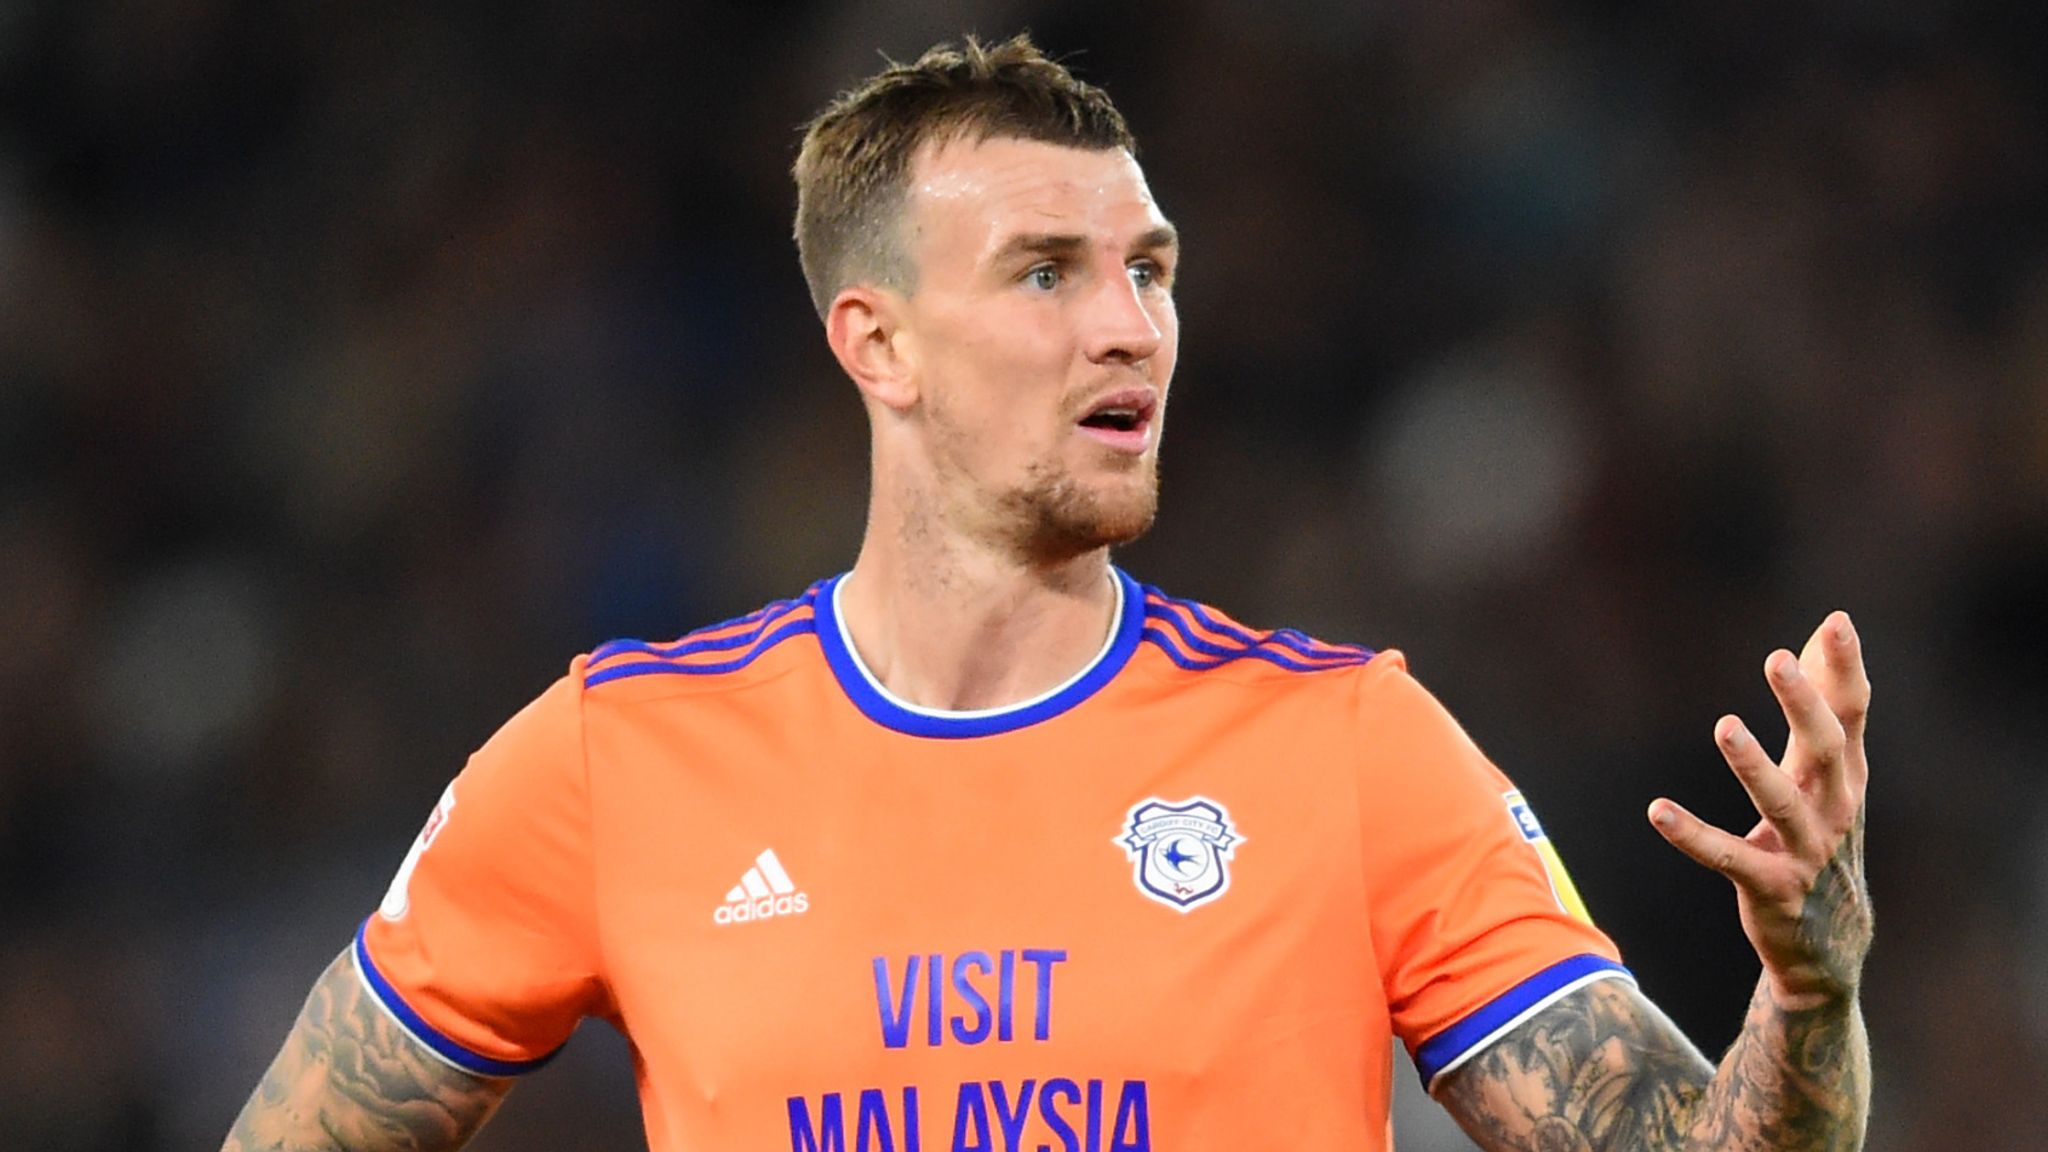 Swansea 0-1 Cardiff City: Aiden Flint fires Bluebirds to first South Wales  derby win since 2013, Football News